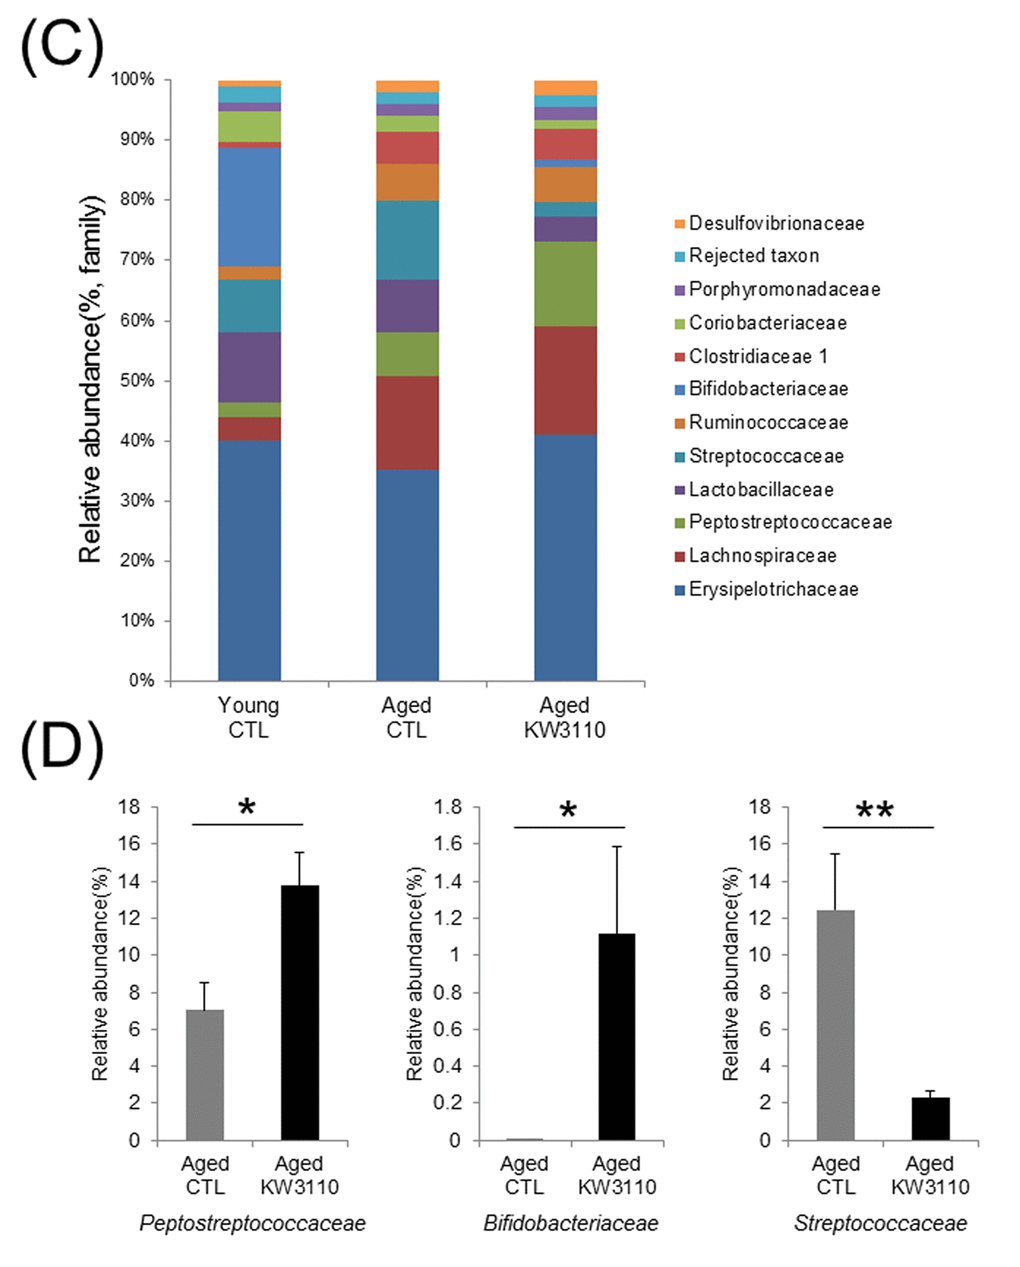 The intake of Lactobacillus paracasei KW3110 in aged mice affected the gut microbial composition. (C) Distribution of gut microbiota (% of total 16S rDNA) at the family level. Families with proportions less than 1% are not listed. (D) Comparisons of relative abundances of Peptostreptococcaceae (left panel), Bifidobacteriaceae (middle panel), and Streptococcaceae (right panel) families. Values are presented as the means ± SEM. Significance was assumed if the p value was *p **p Lactobacillus paracasei KW3110 diet